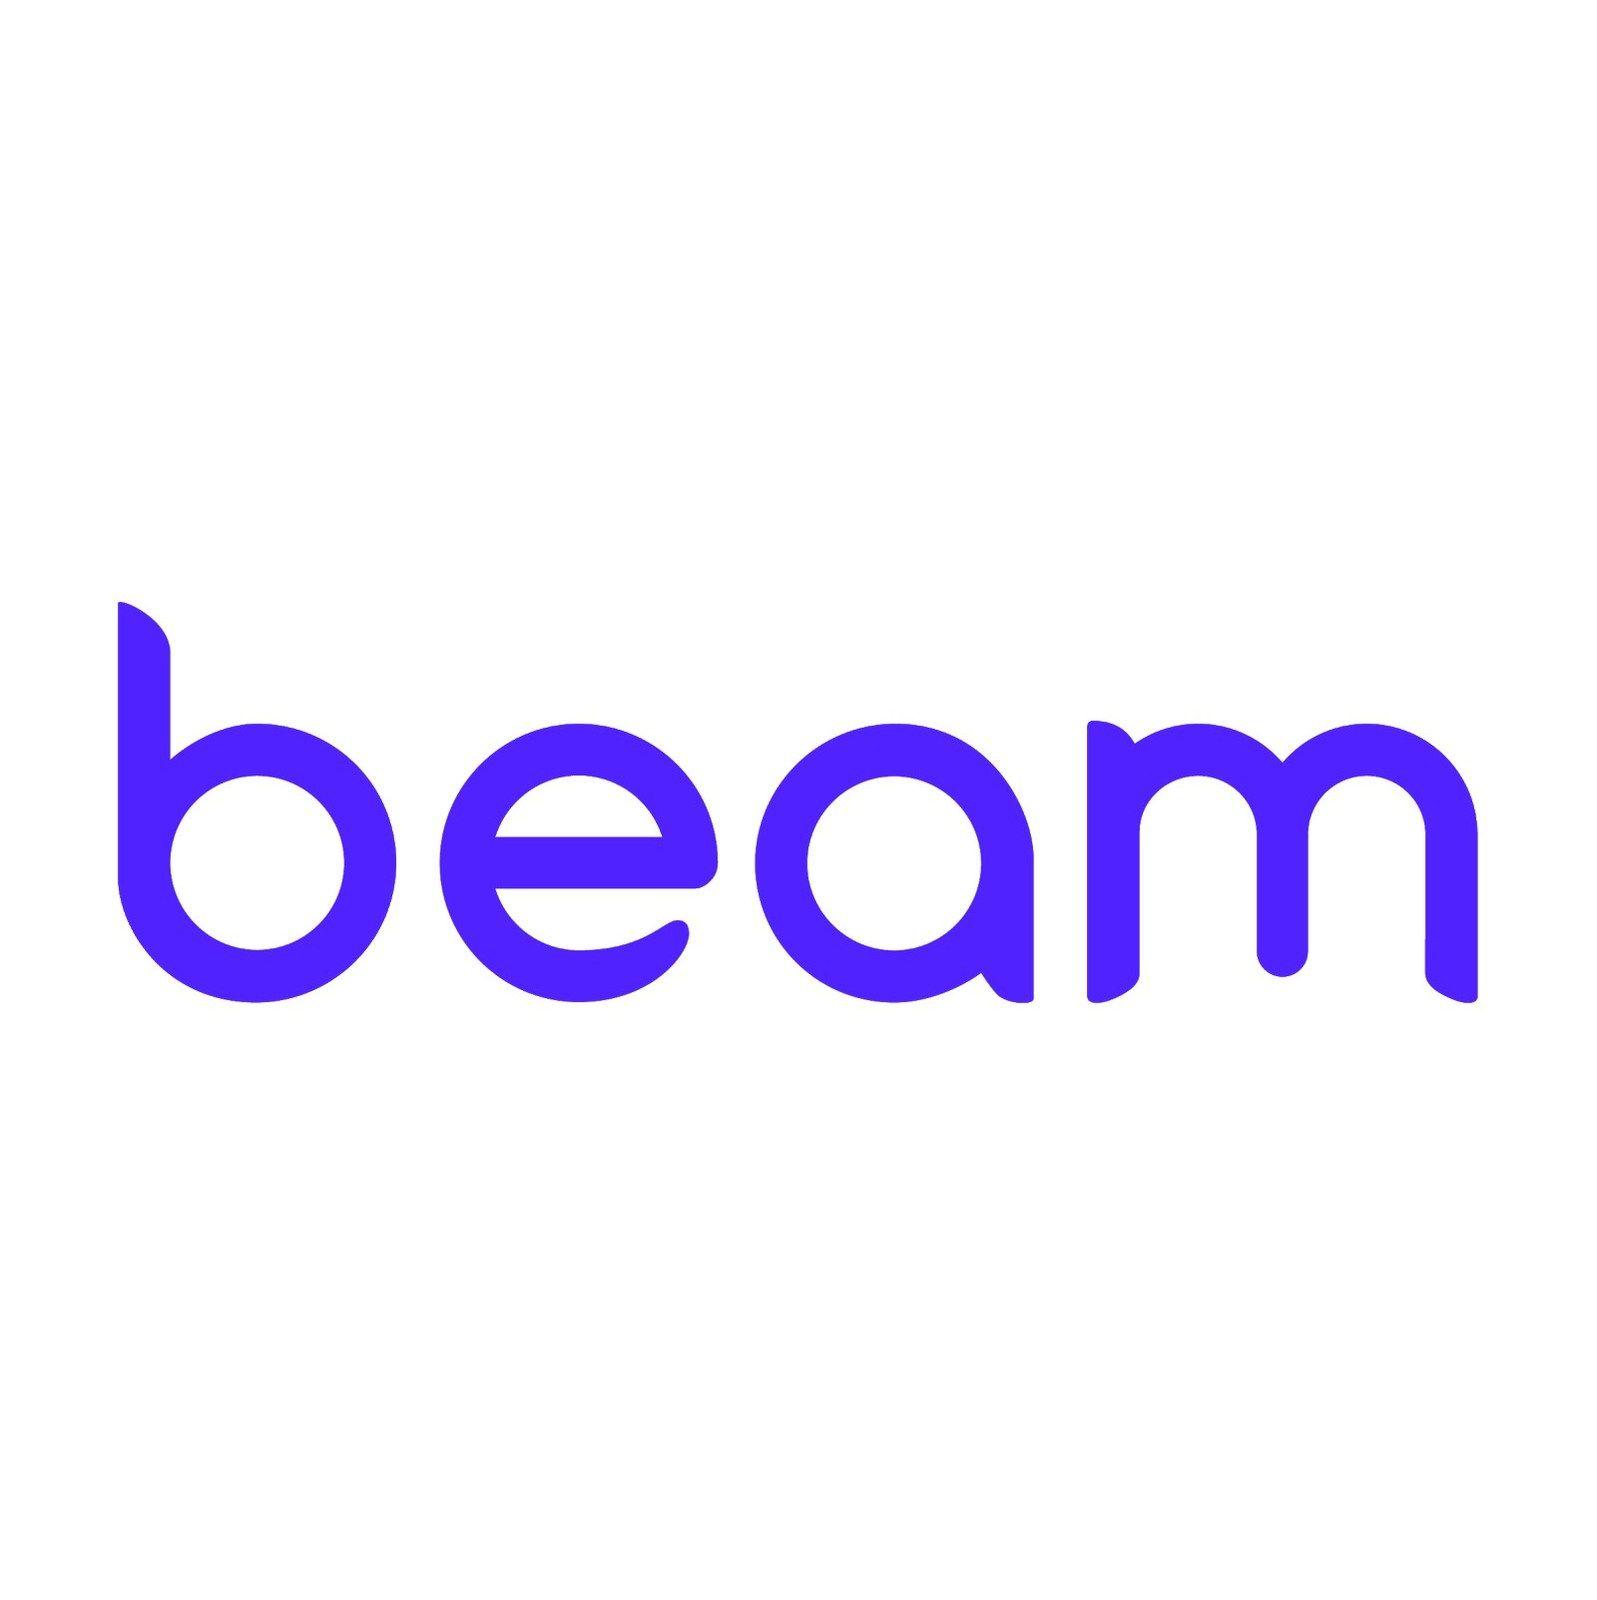 Beam Logo - Beam's rapid growth and expansive footprint make it the largest